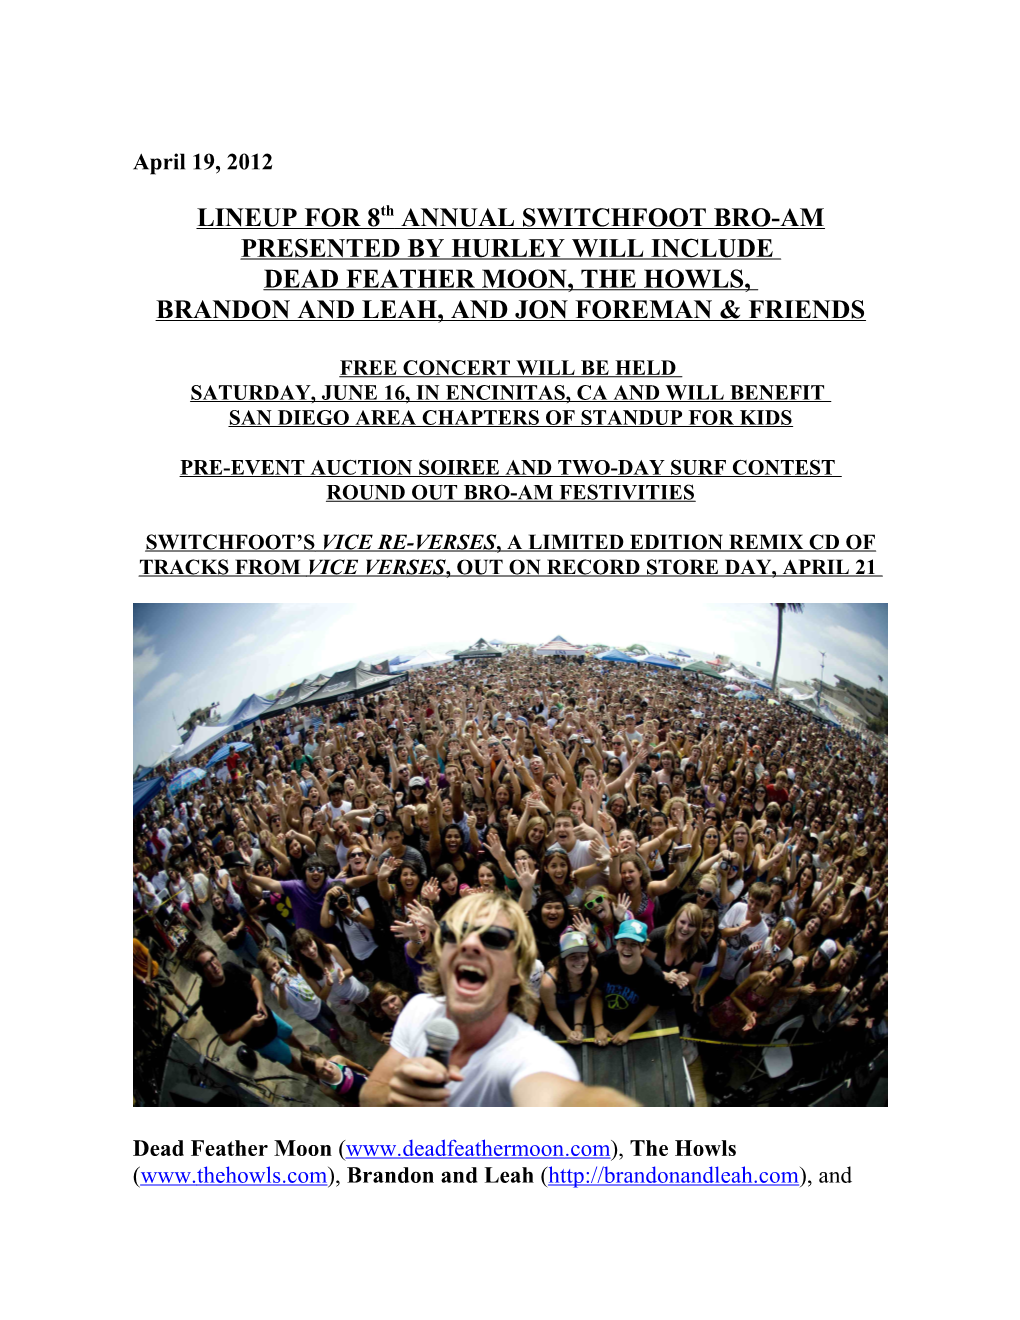 LINEUP for 8Th ANNUAL SWITCHFOOT BRO-AM PRESENTED by HURLEY WILL INCLUDE